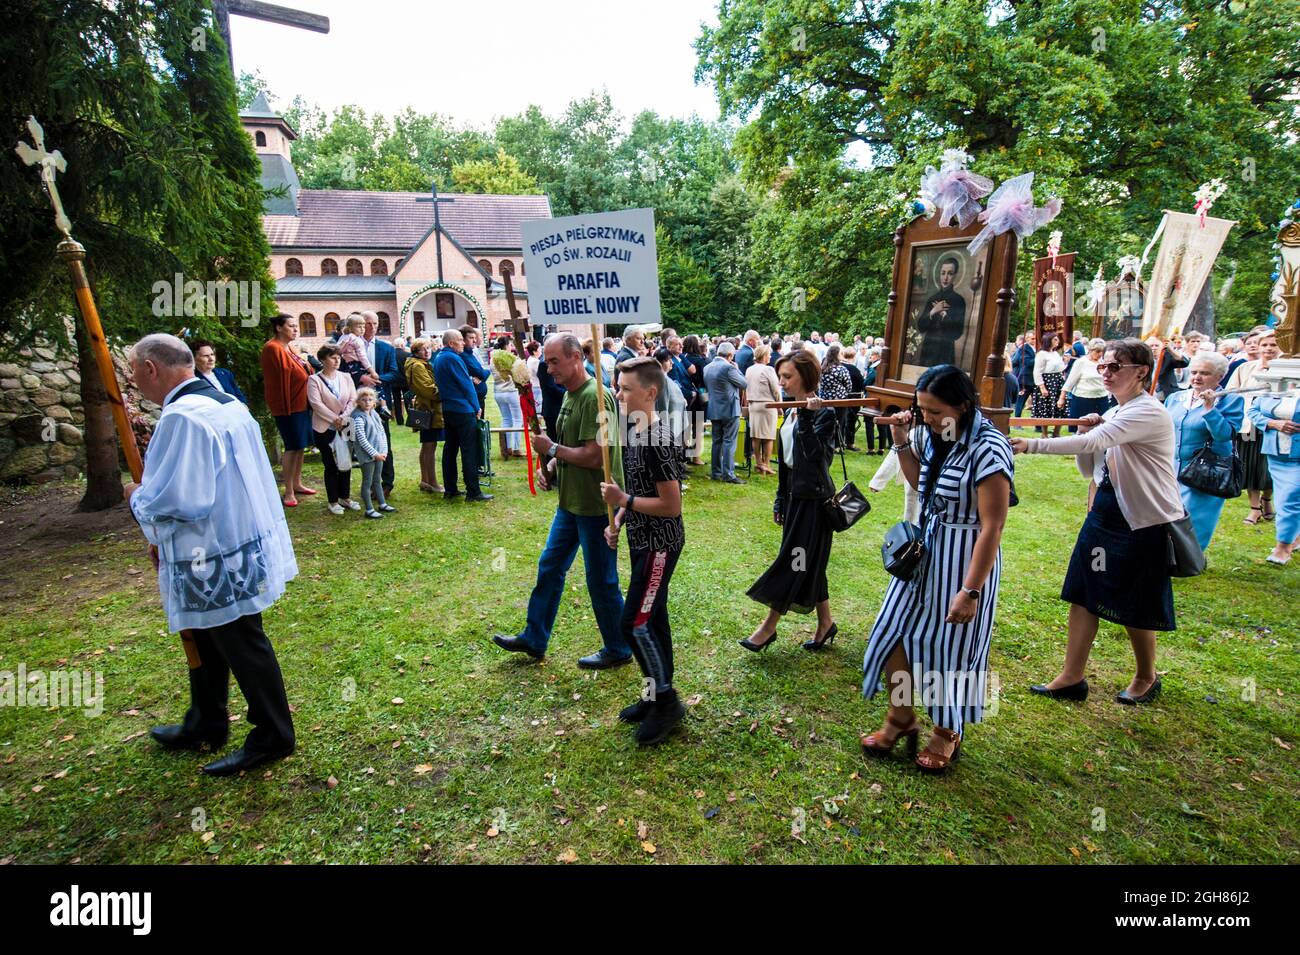 Religious celebration of Saint Rosalia in the open air at a secluded chapel in central Poland Stock Photo